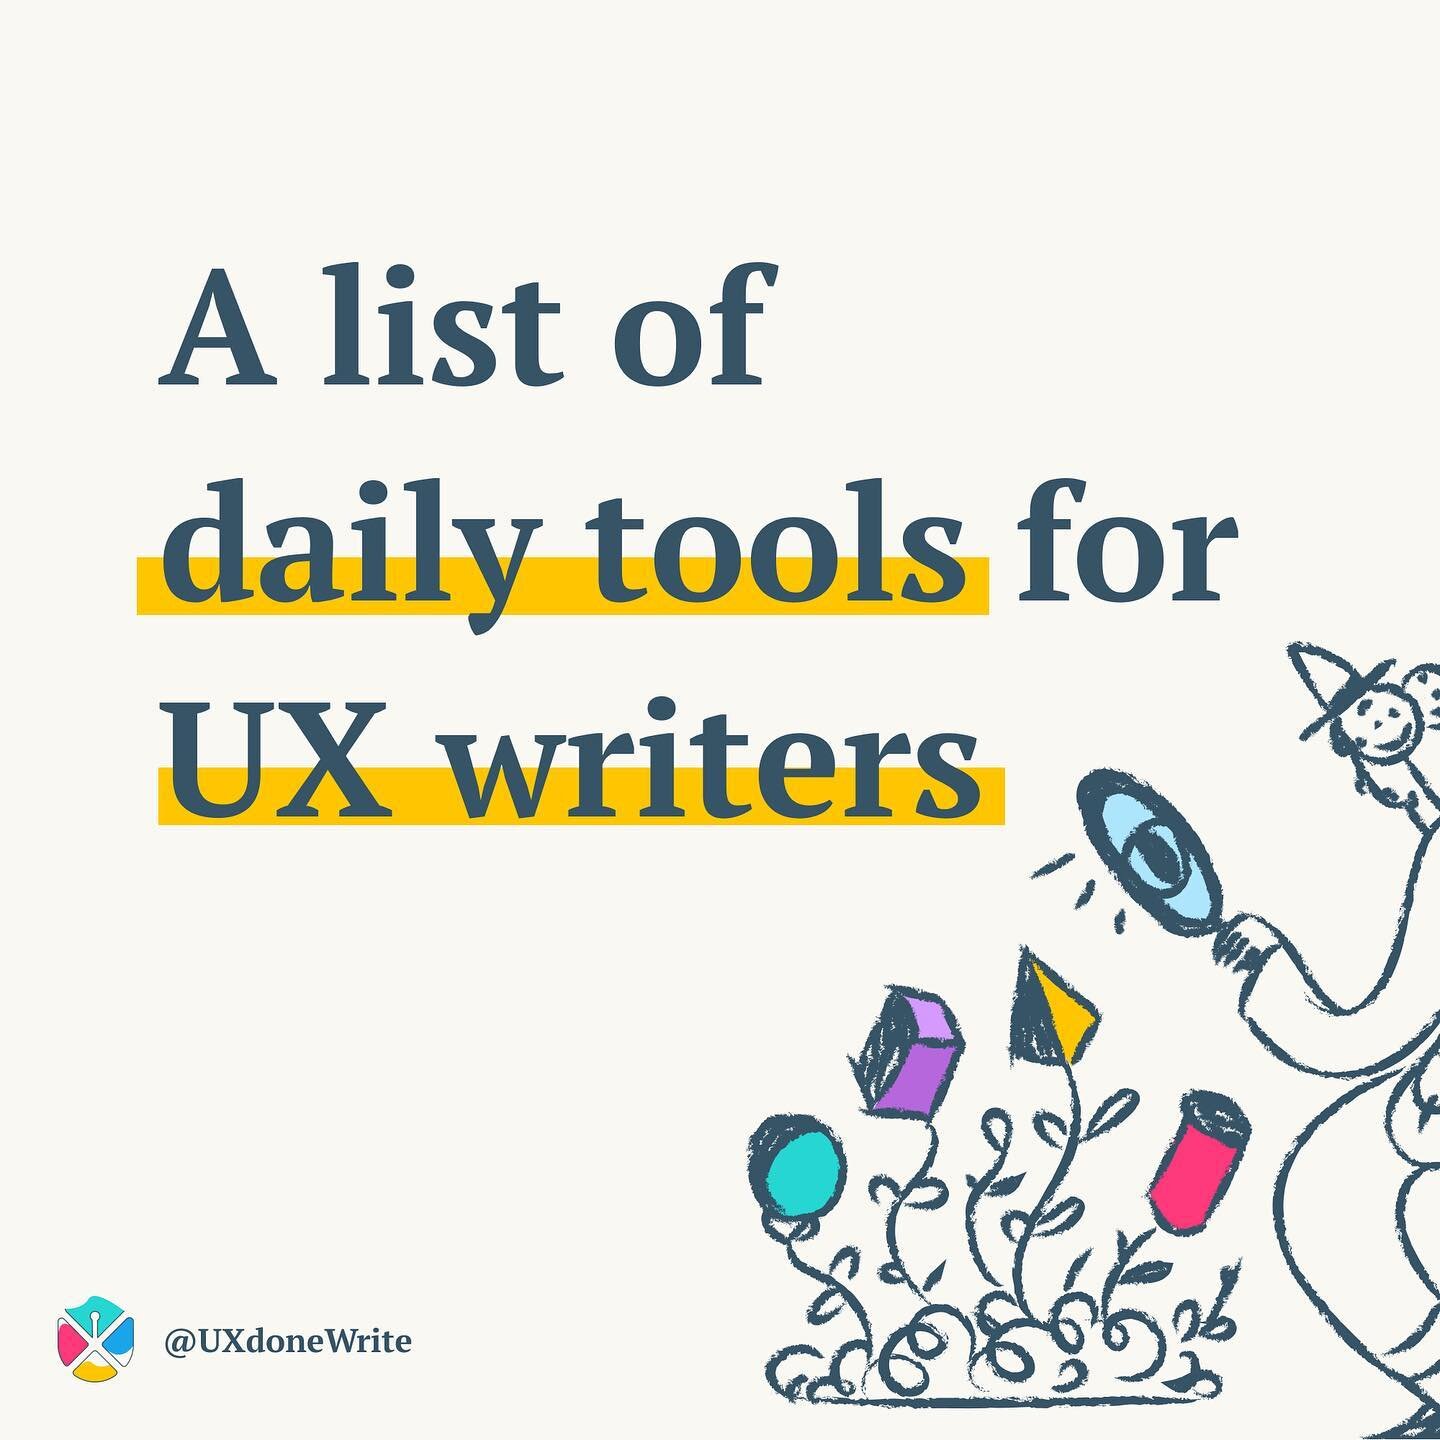 Google Docs or Sheets might still be the foundation for collaborative writing, but there are several tools out there to make your life as a UX writer easier.⁠⠀
These are my top 5 choices on any given day (not counting thesaurus.com 😊), but check out